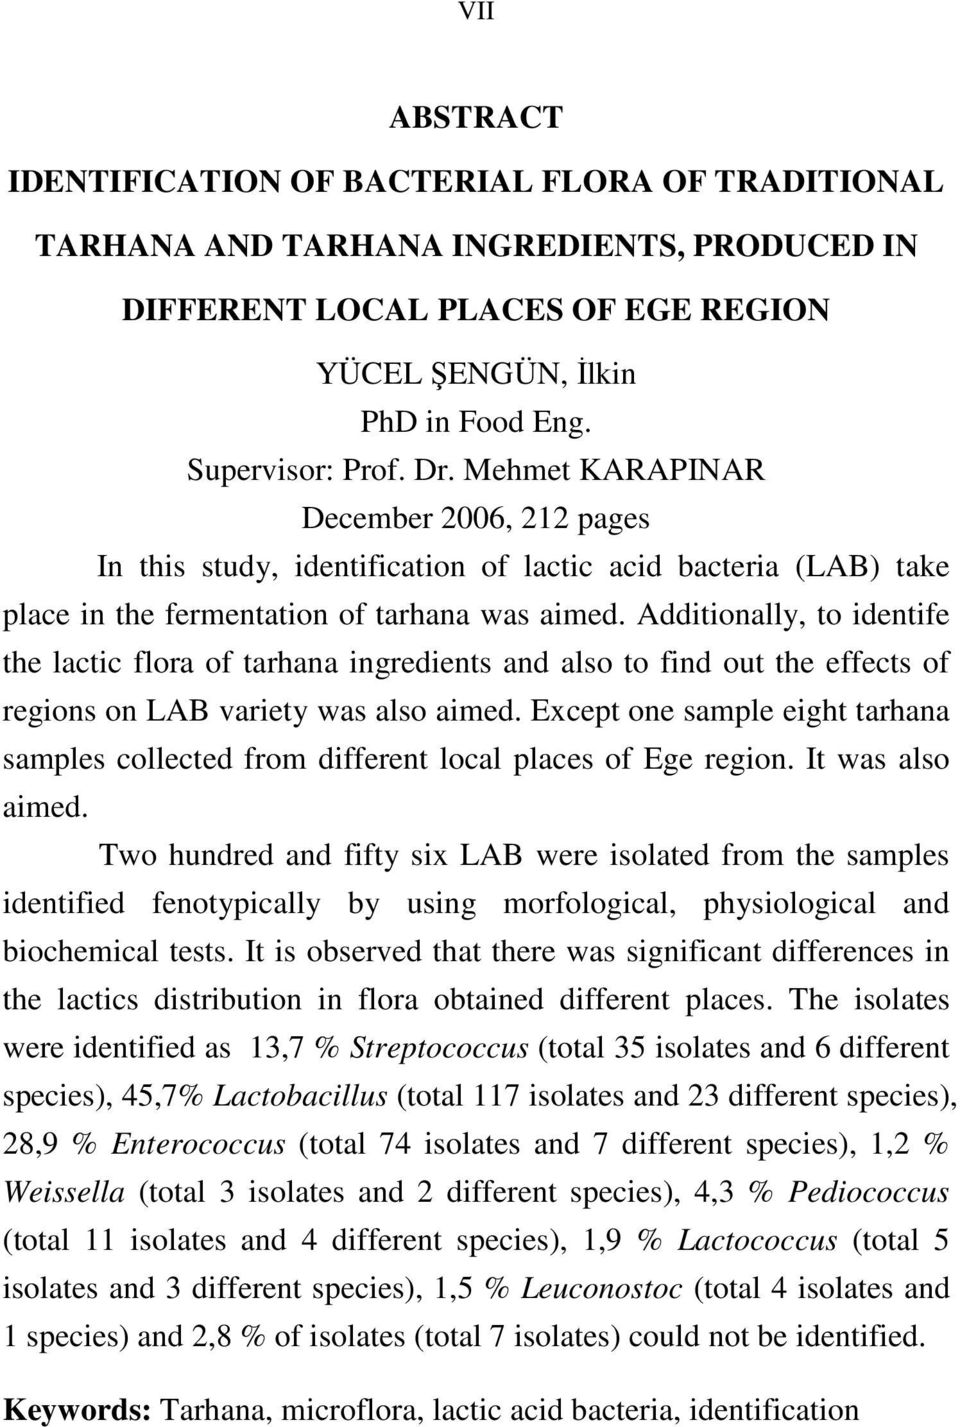 Additionally, to identife the lactic flora of tarhana ingredients and also to find out the effects of regions on LAB variety was also aimed.